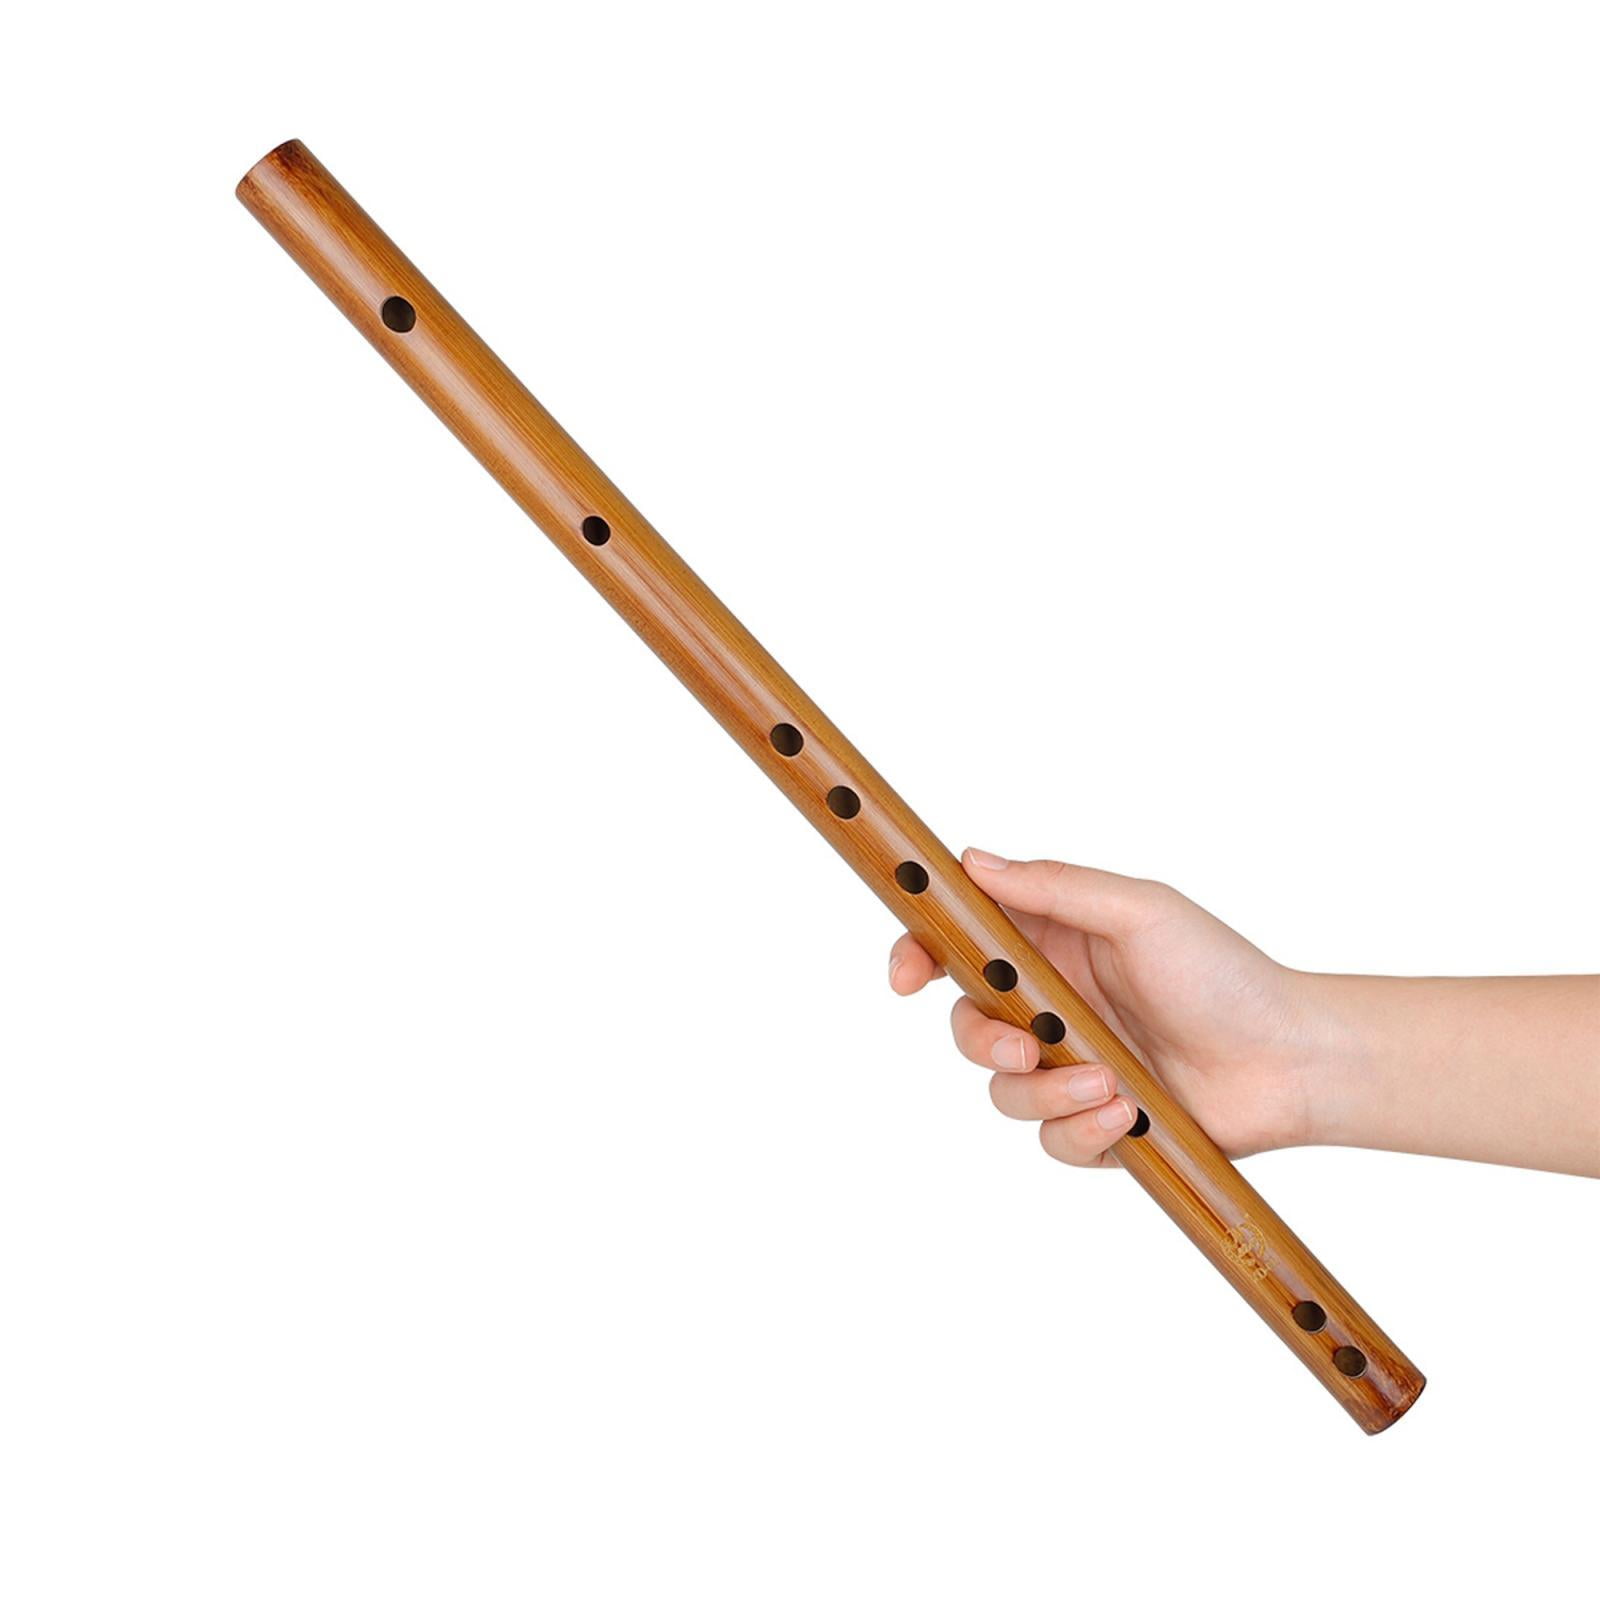 Desi Toys Flute wooden musical toy handcrafted traditional toys classic perfect gift Basuri 